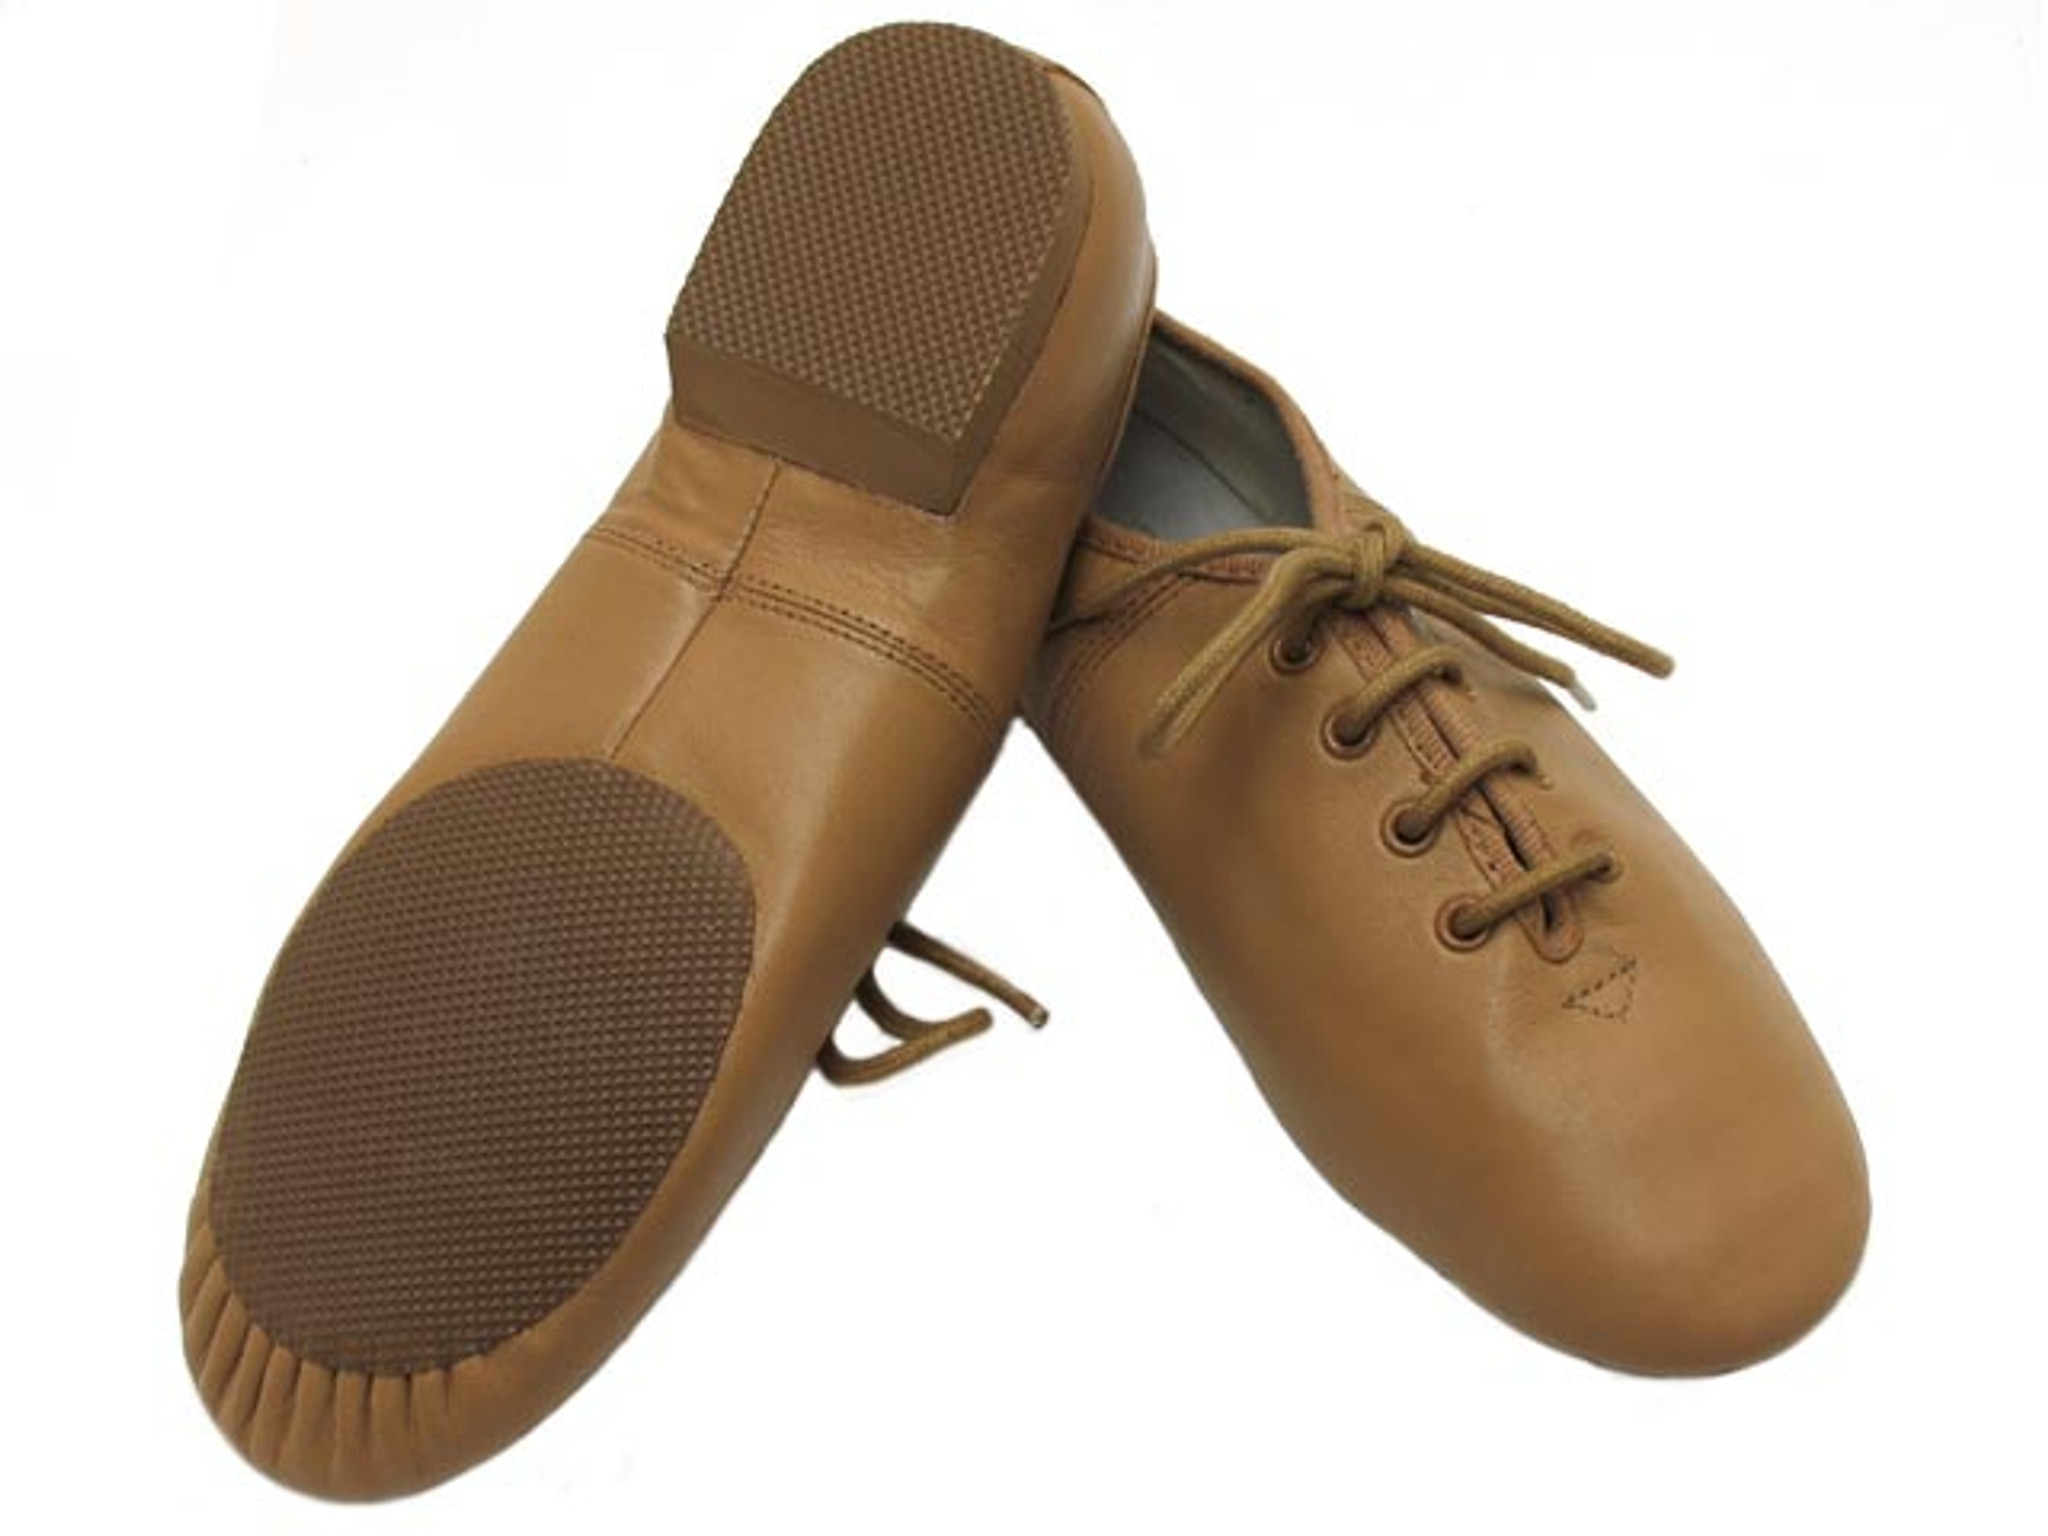 Leather Jazz Shoes with Lace Up Split Sole by Dance Direct